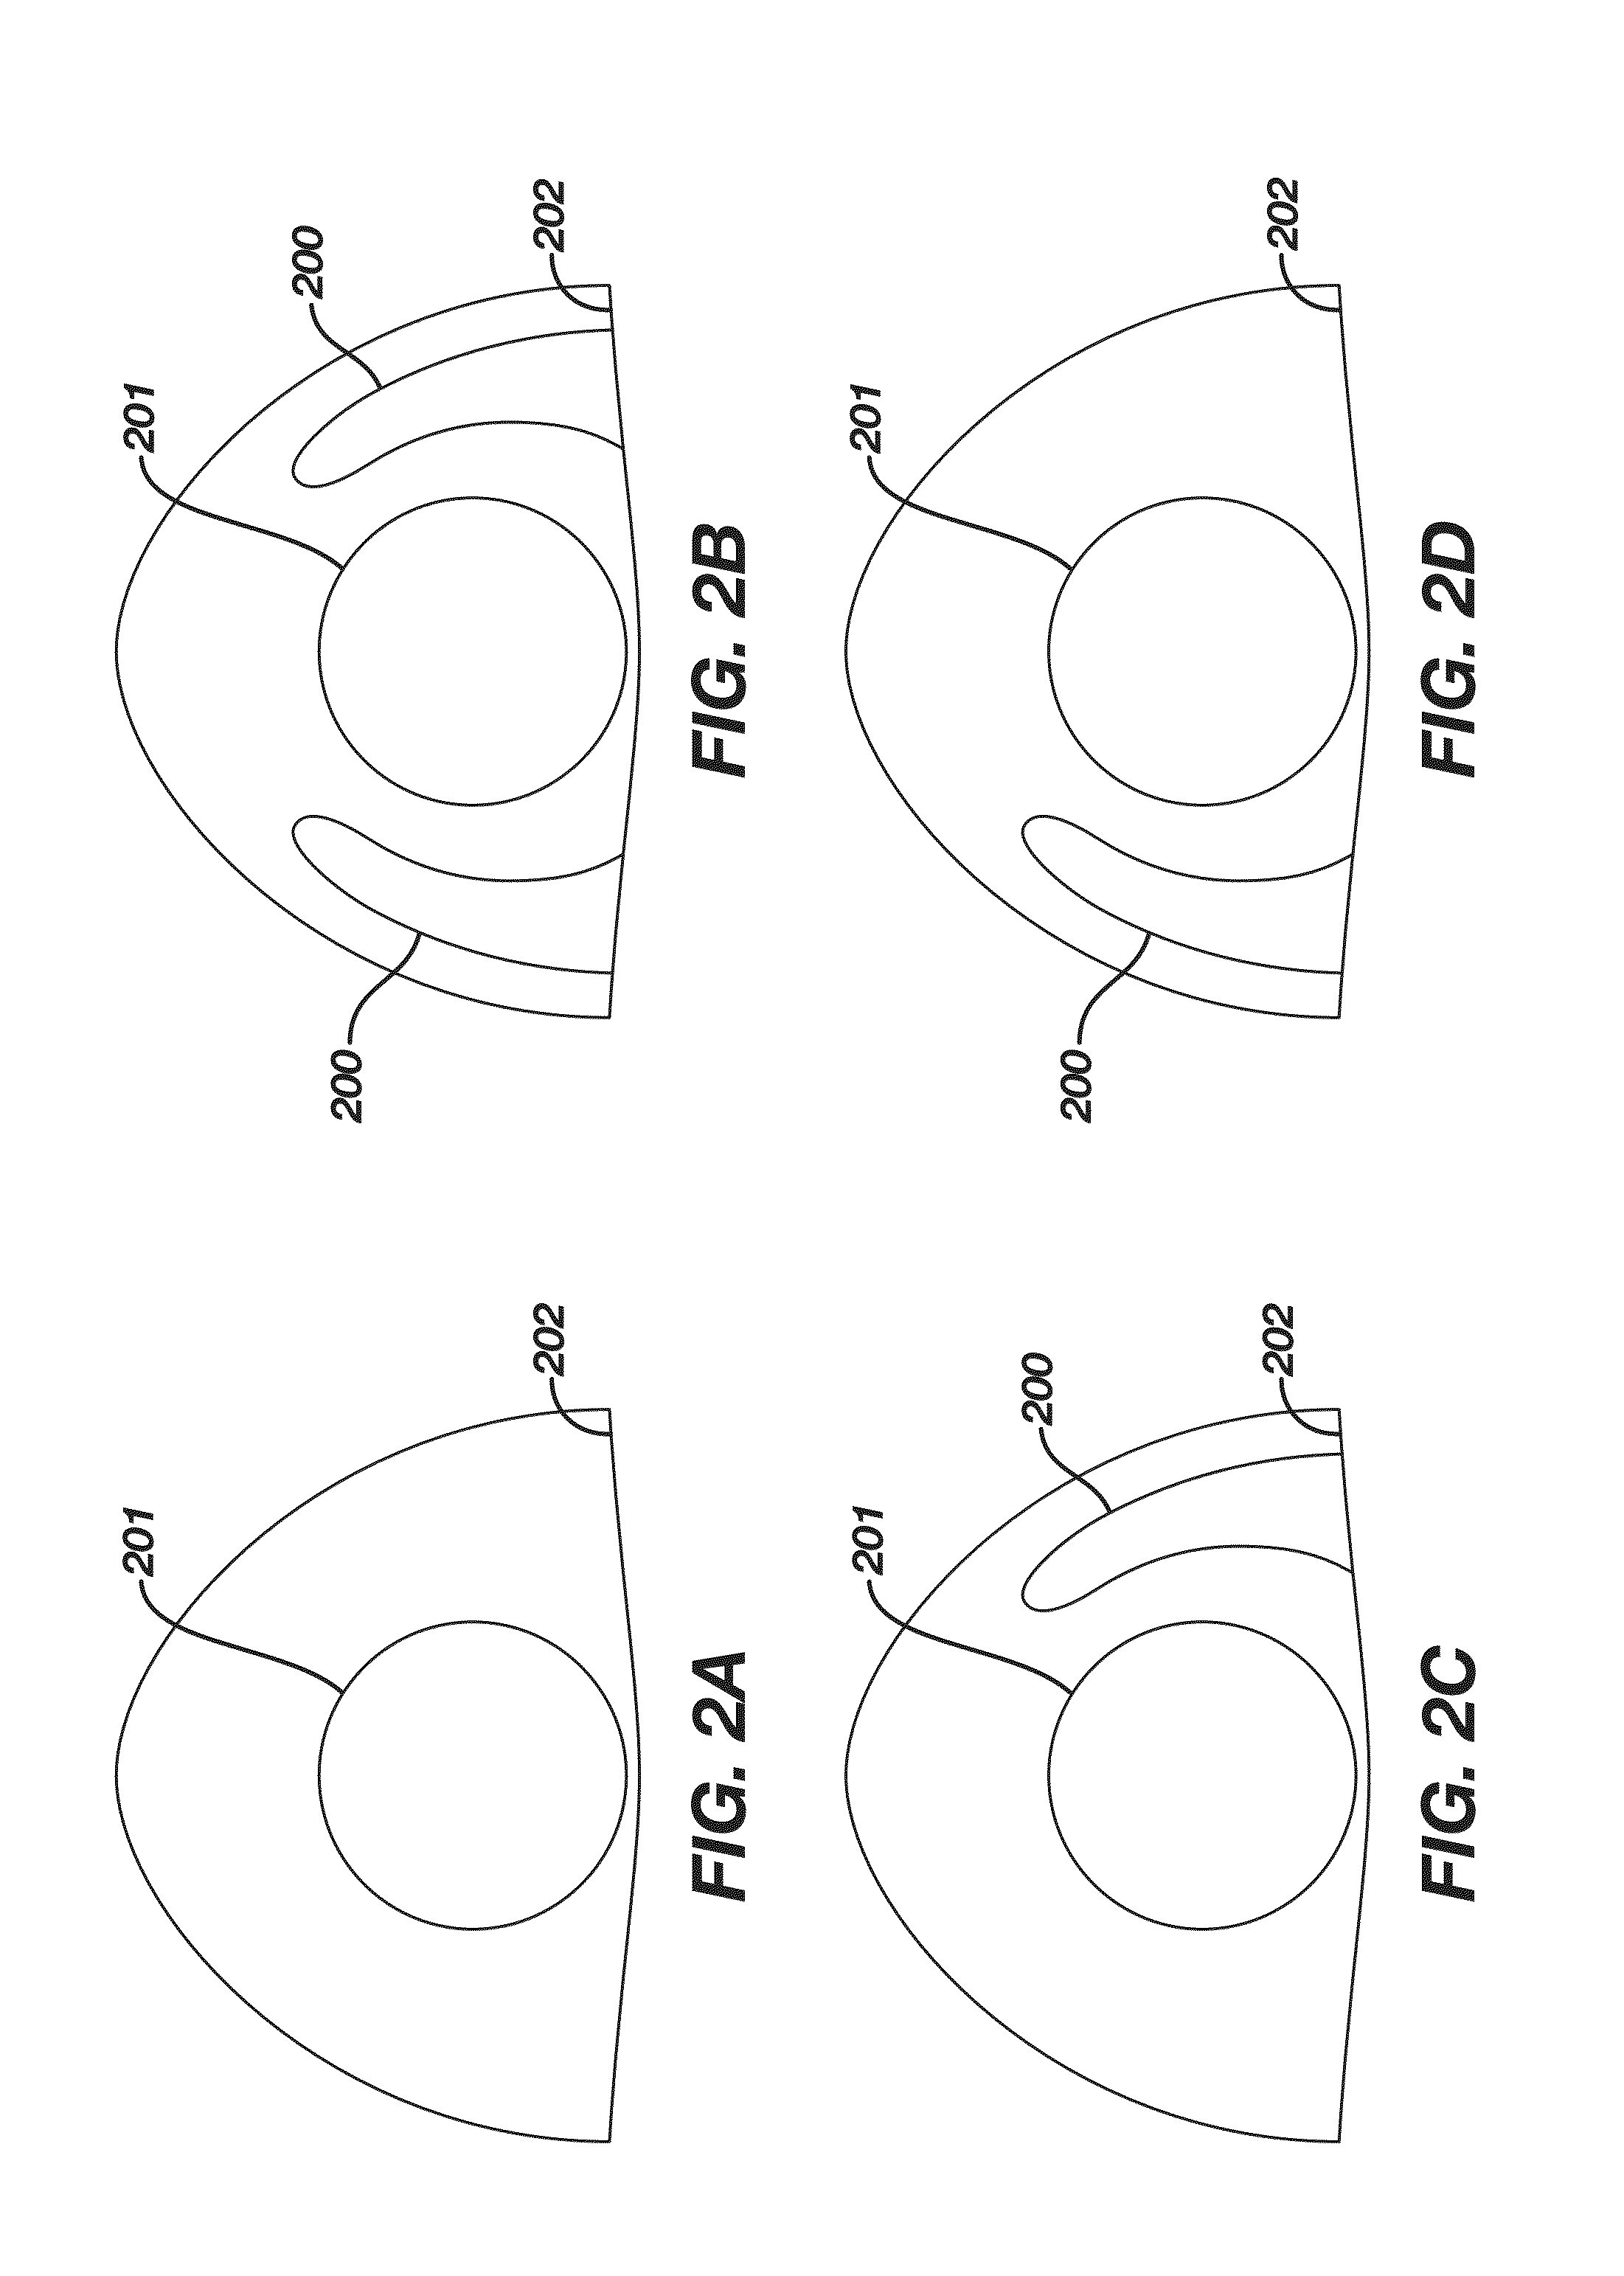 Method and apparatus of forming a translating multifocal contact lens having a lower-lid contact surface